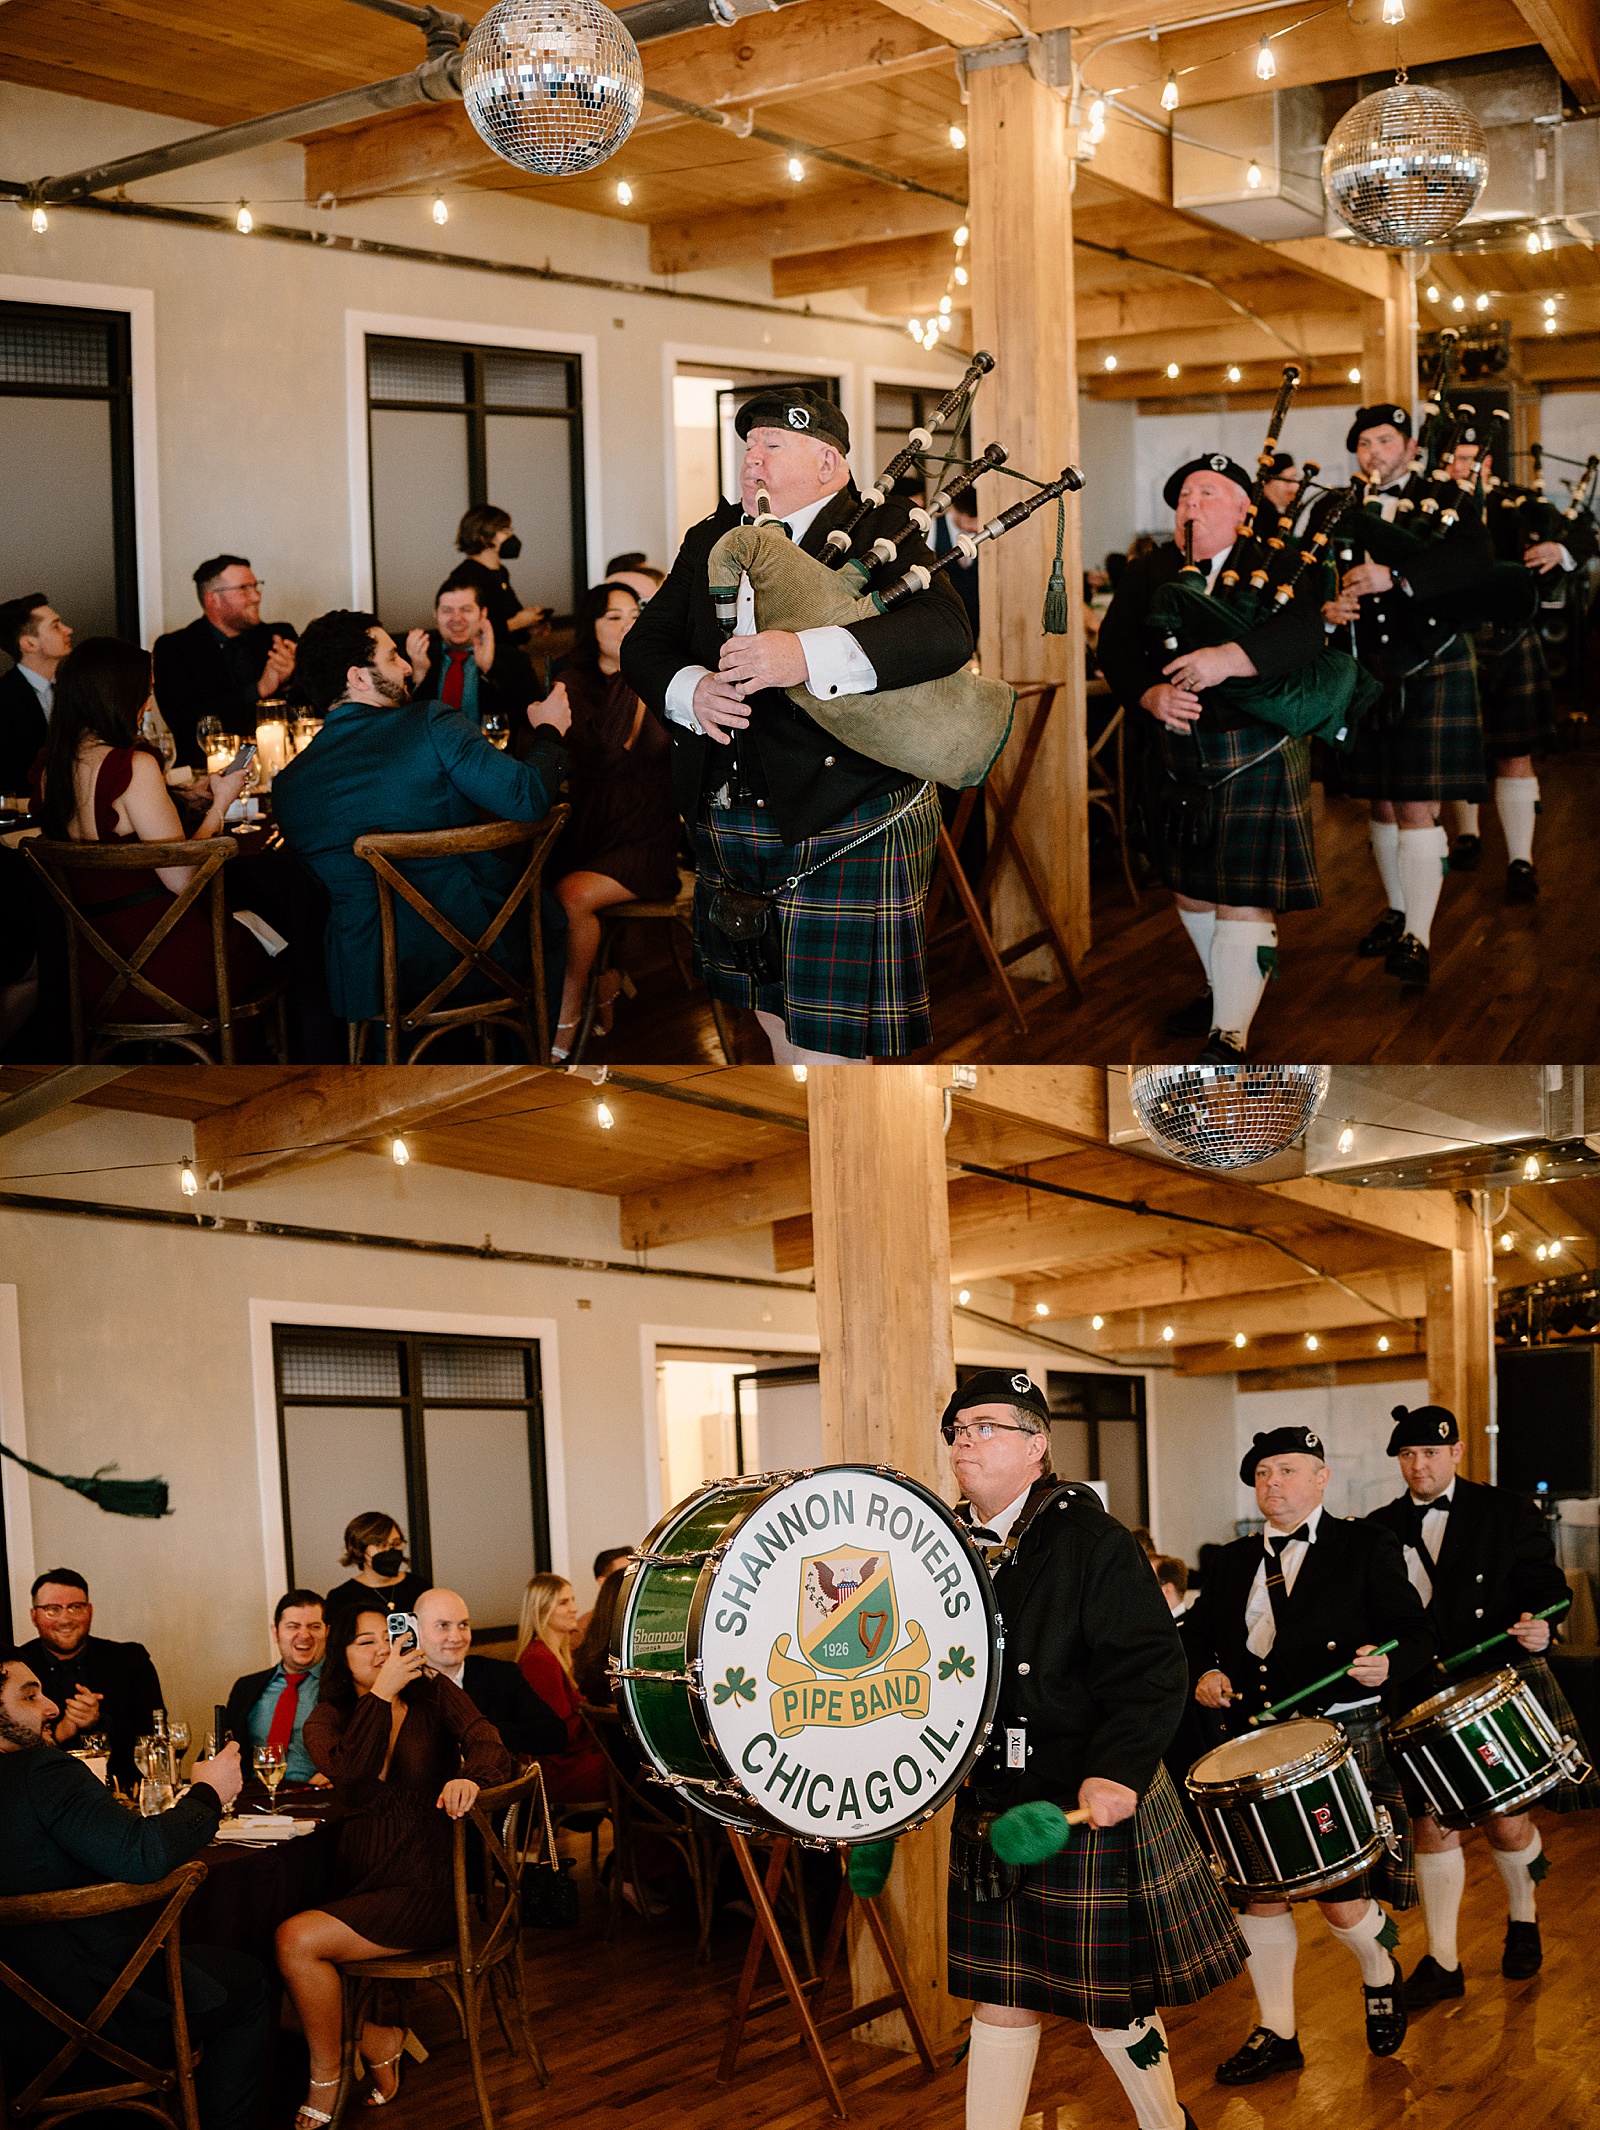 Scottish band marching into wedding reception with bagpipes 